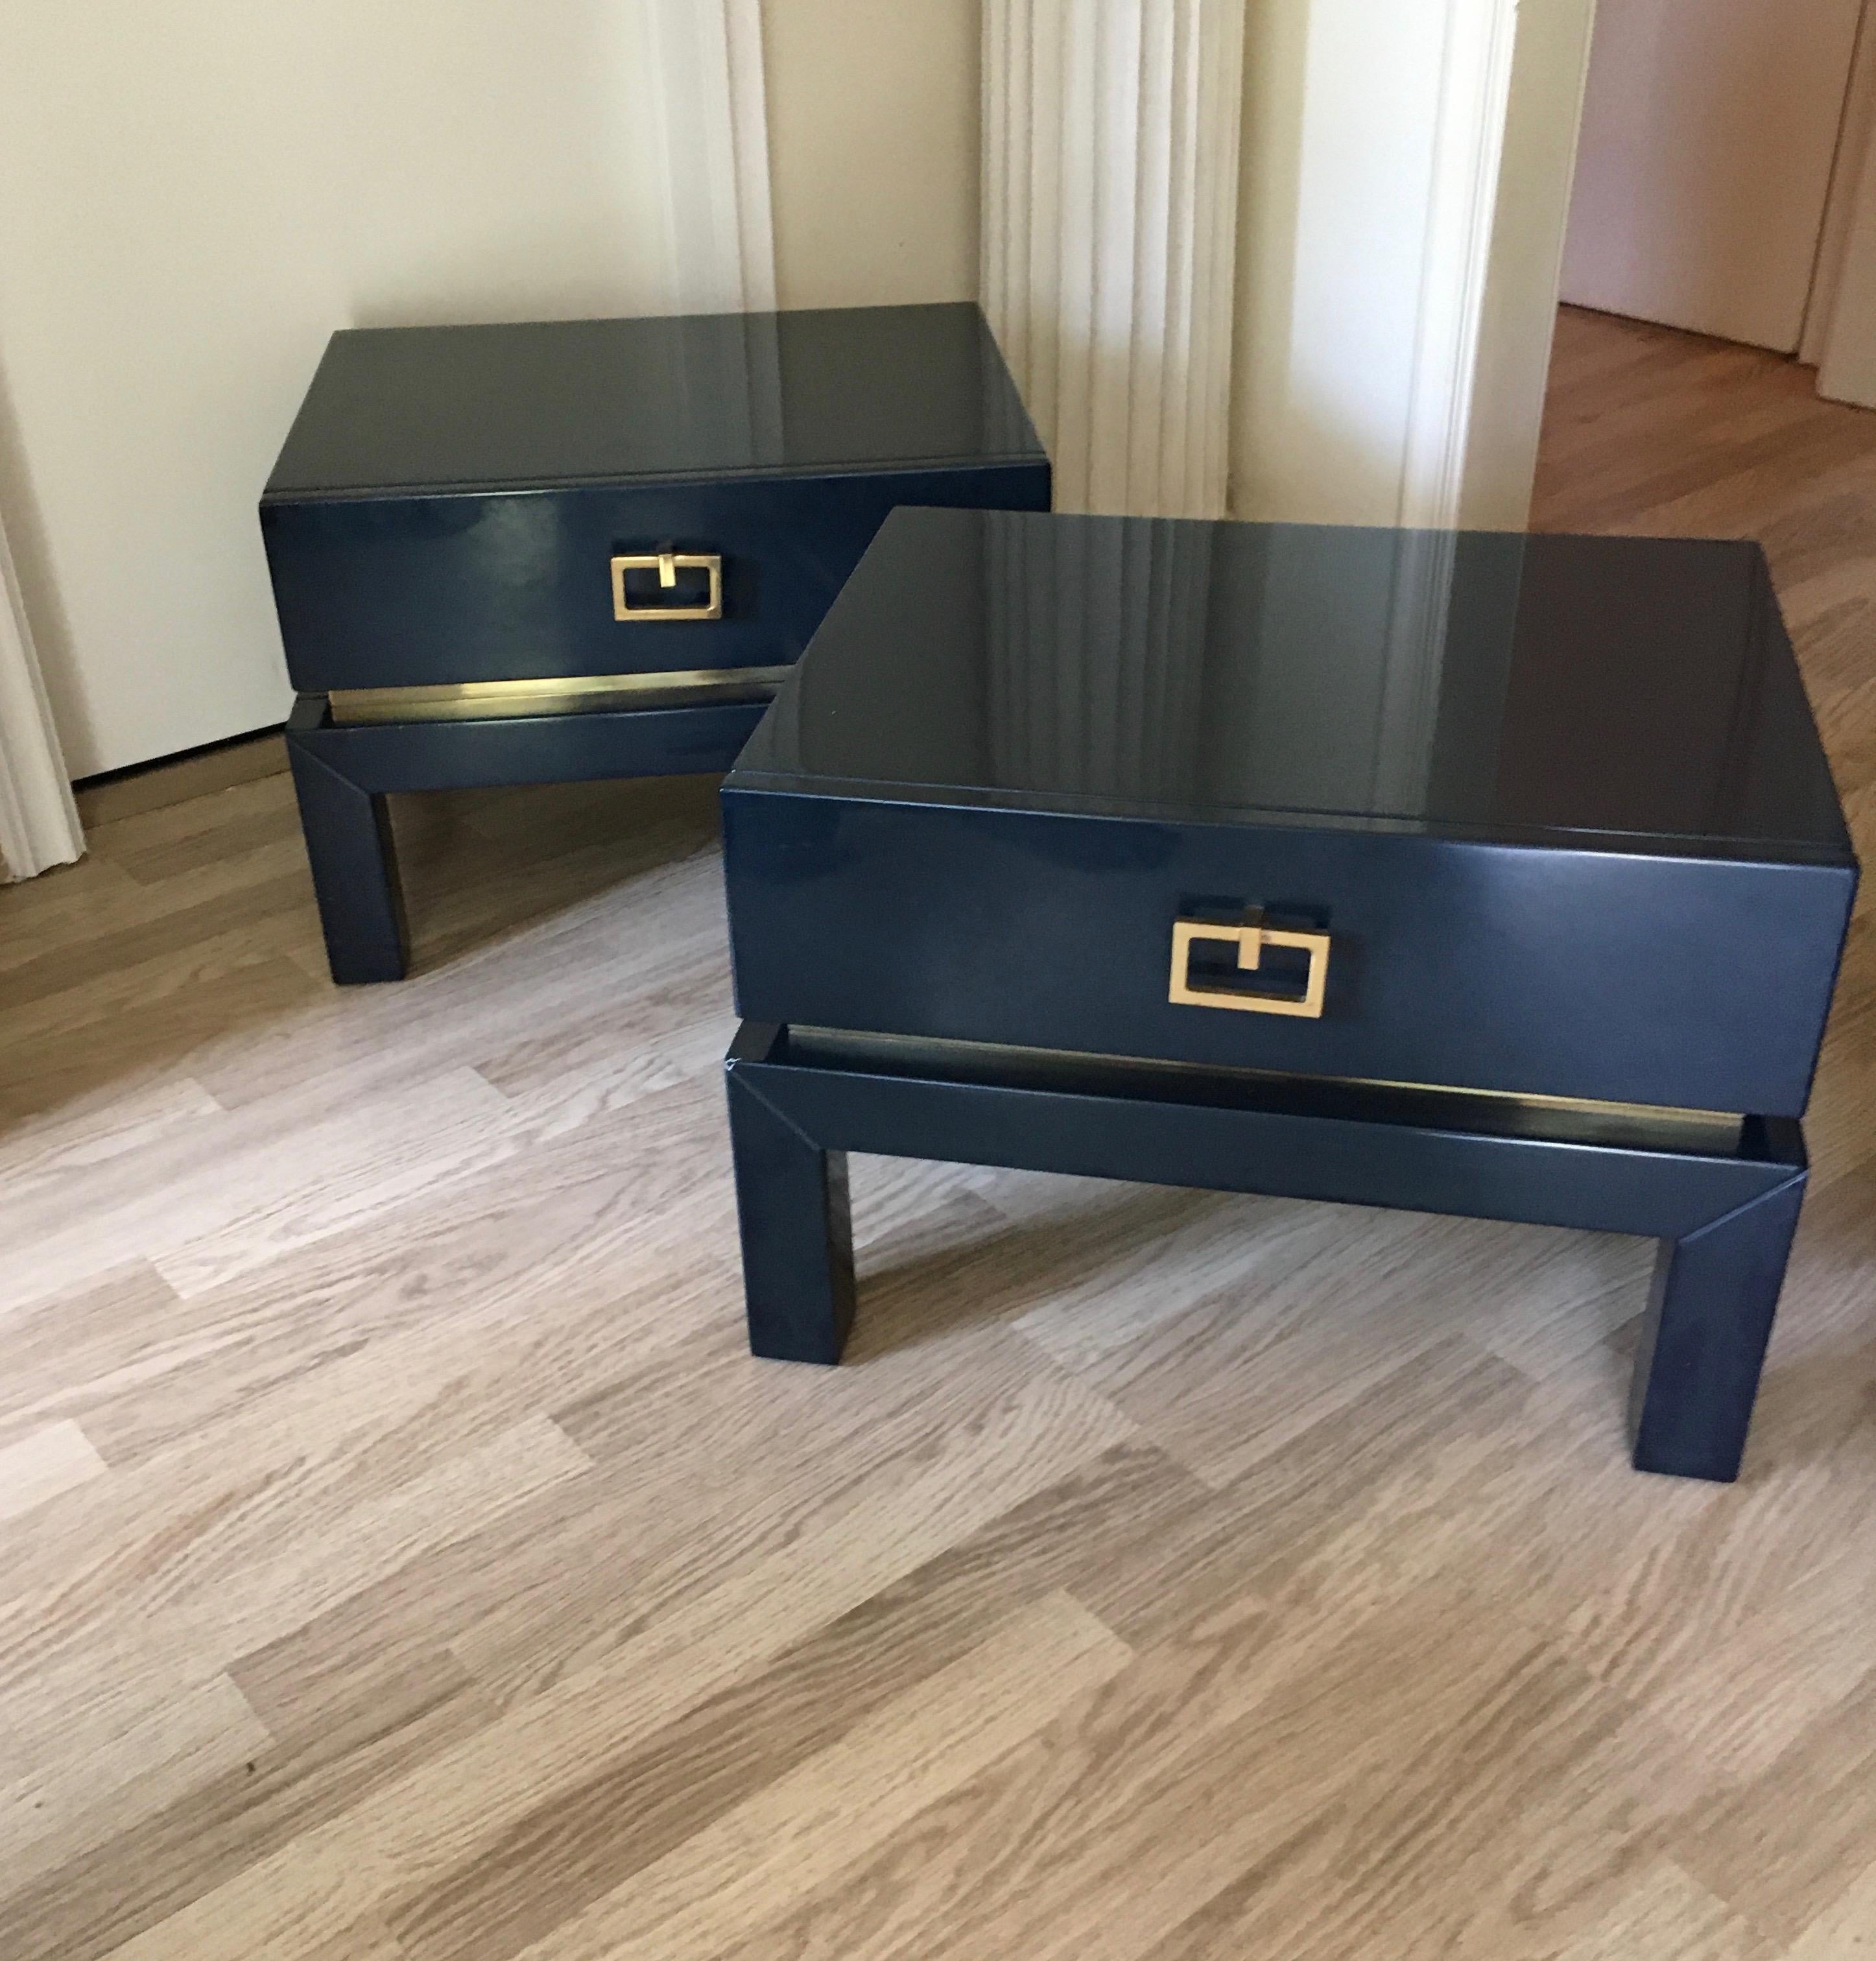 Late 20th Century Night Blue Lacquer Side Tables with Brass Details by Maison Jansen, France 1975